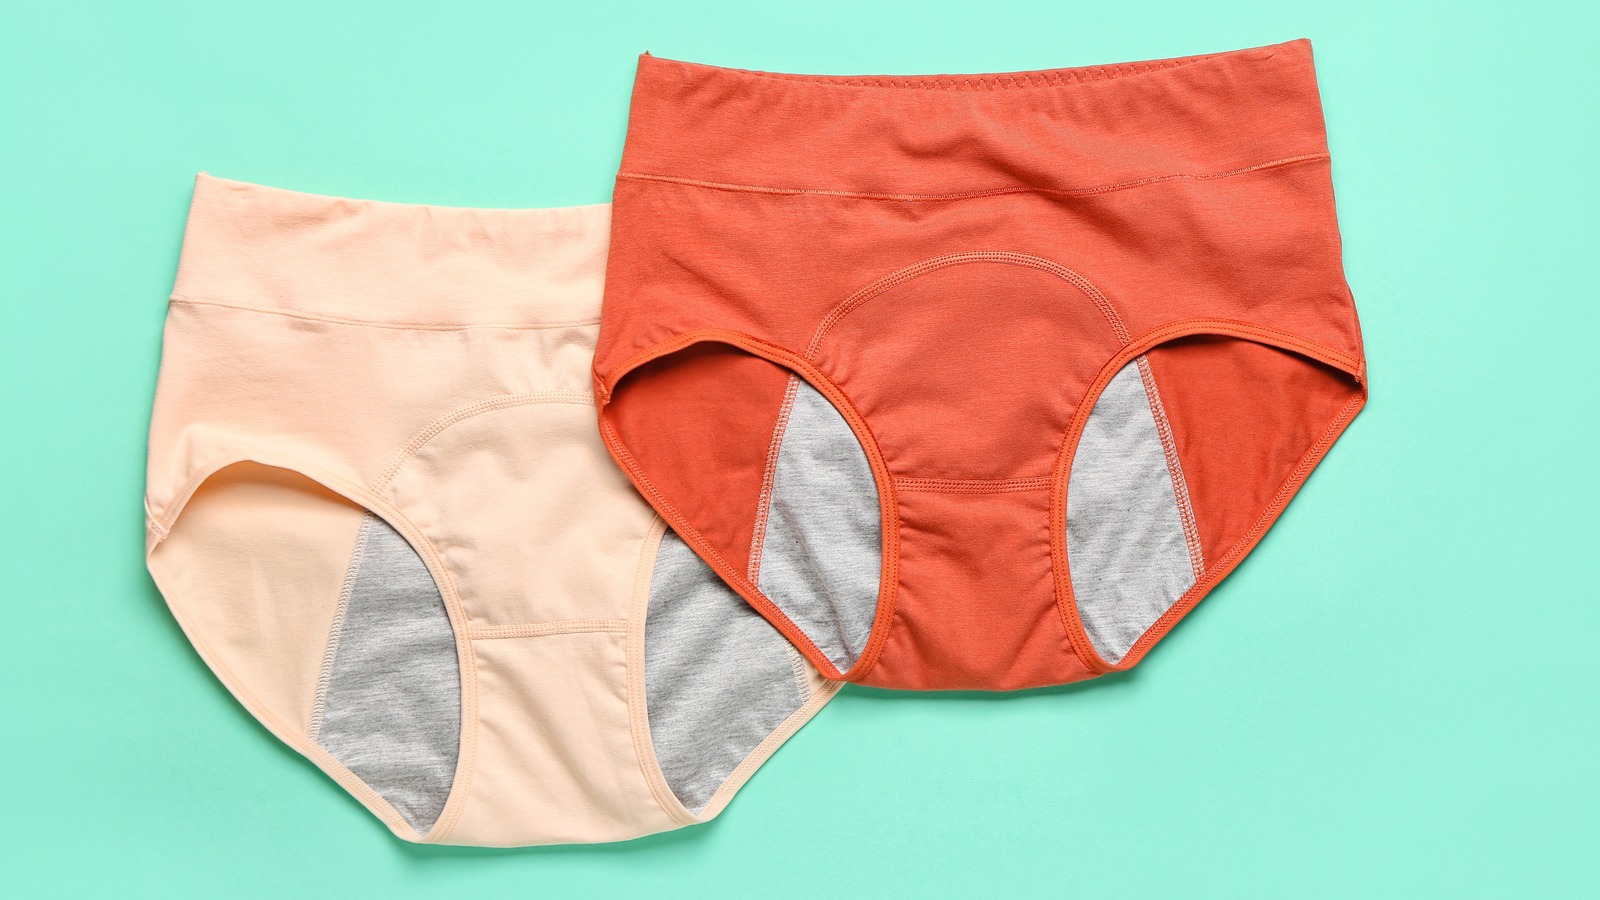 What We Know About The Thinx Underwear Lawsuit And How It May Affect You